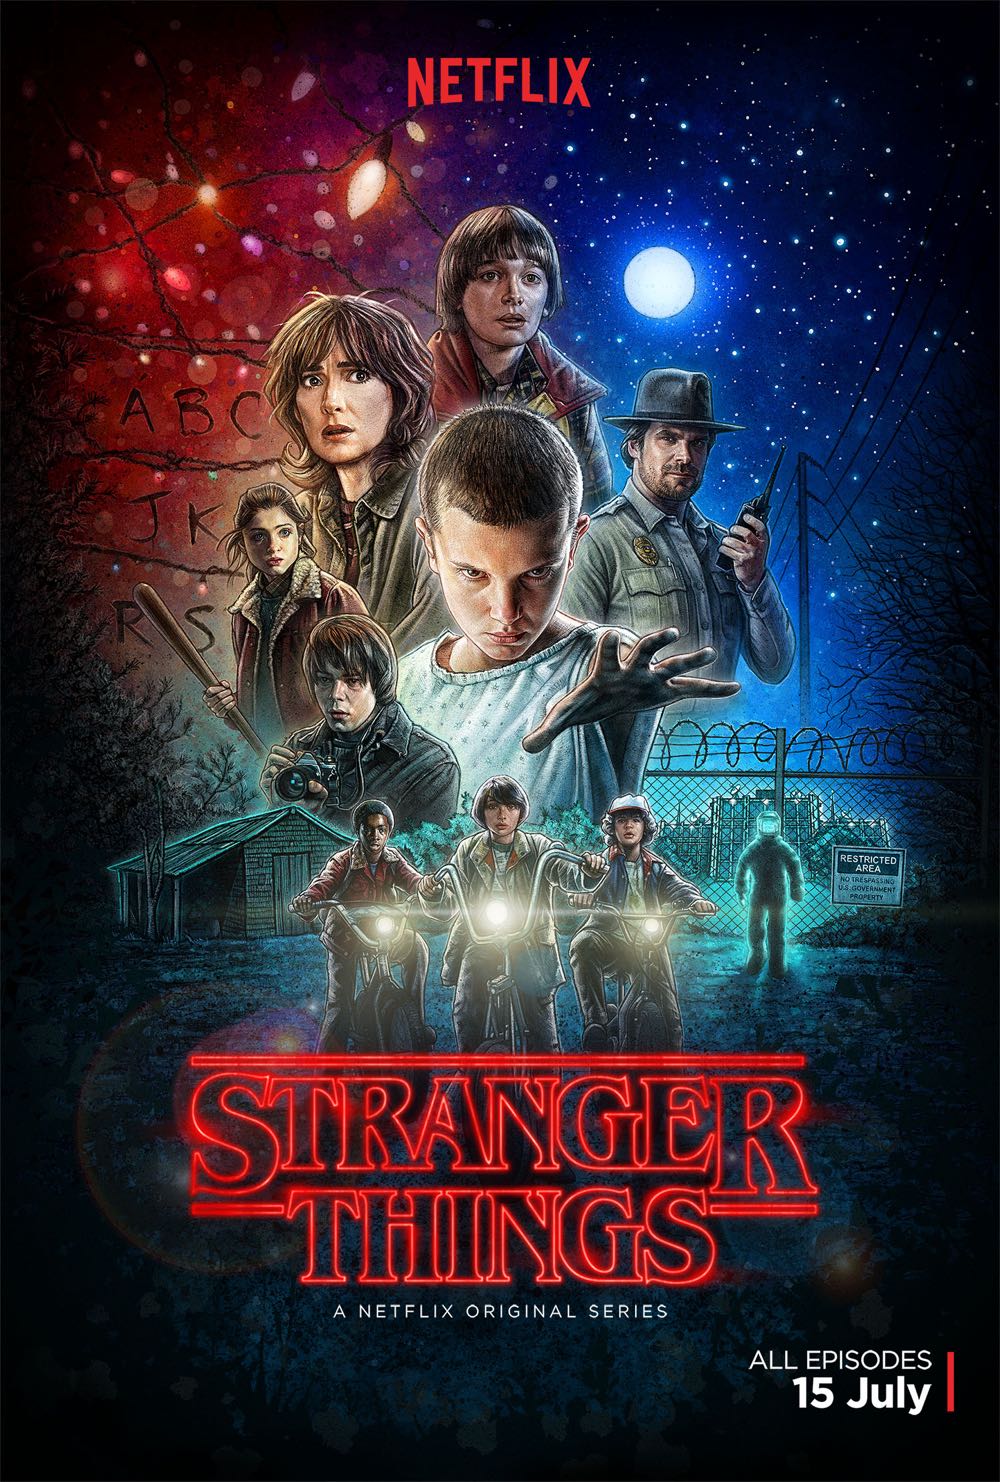 The 10 Best Movies From The Cast of Stranger Things, According to IMDb